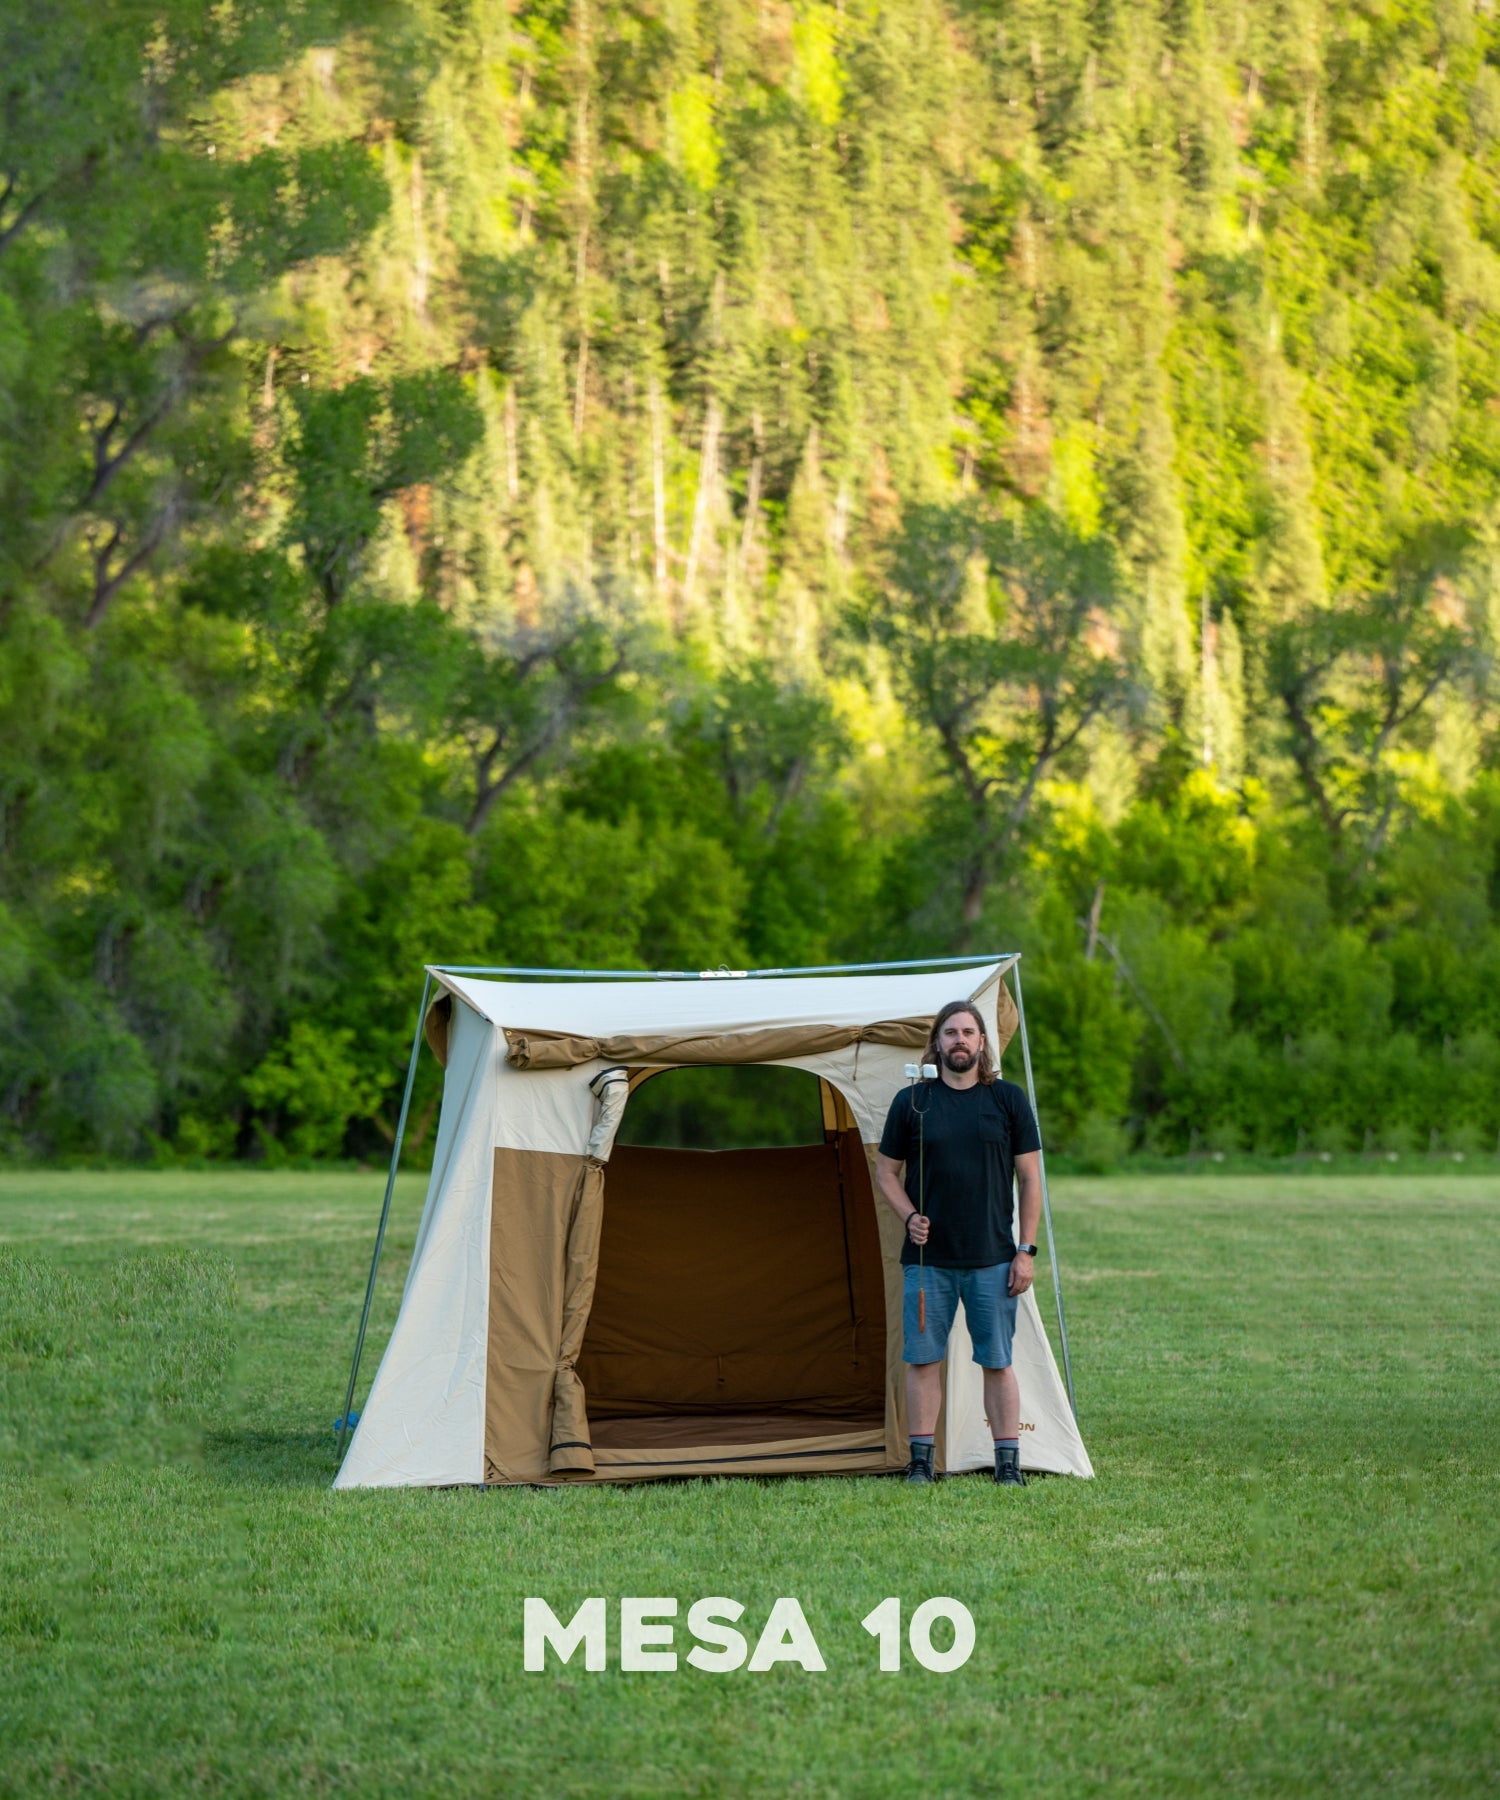 The TETON Sports Mesa 10' Canvas Tent: Image shows a man standing in front of the tent with a marshmallow stick to show comparative size.